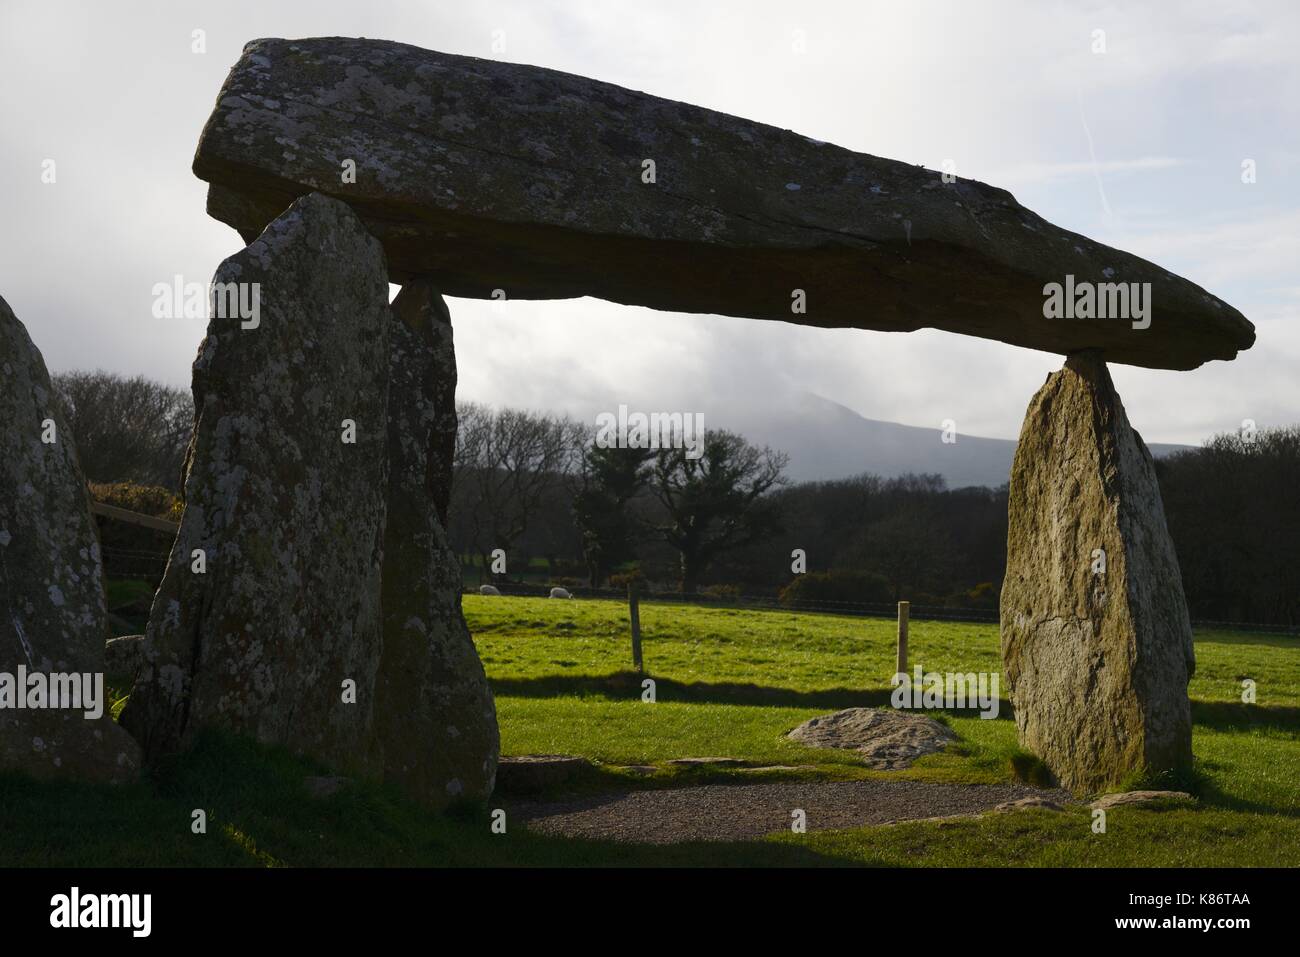 Pentre Ifan megalithic, neolithic chambered tomb or portal dolmen, Pembrokeshire, Wales, UK Stock Photo